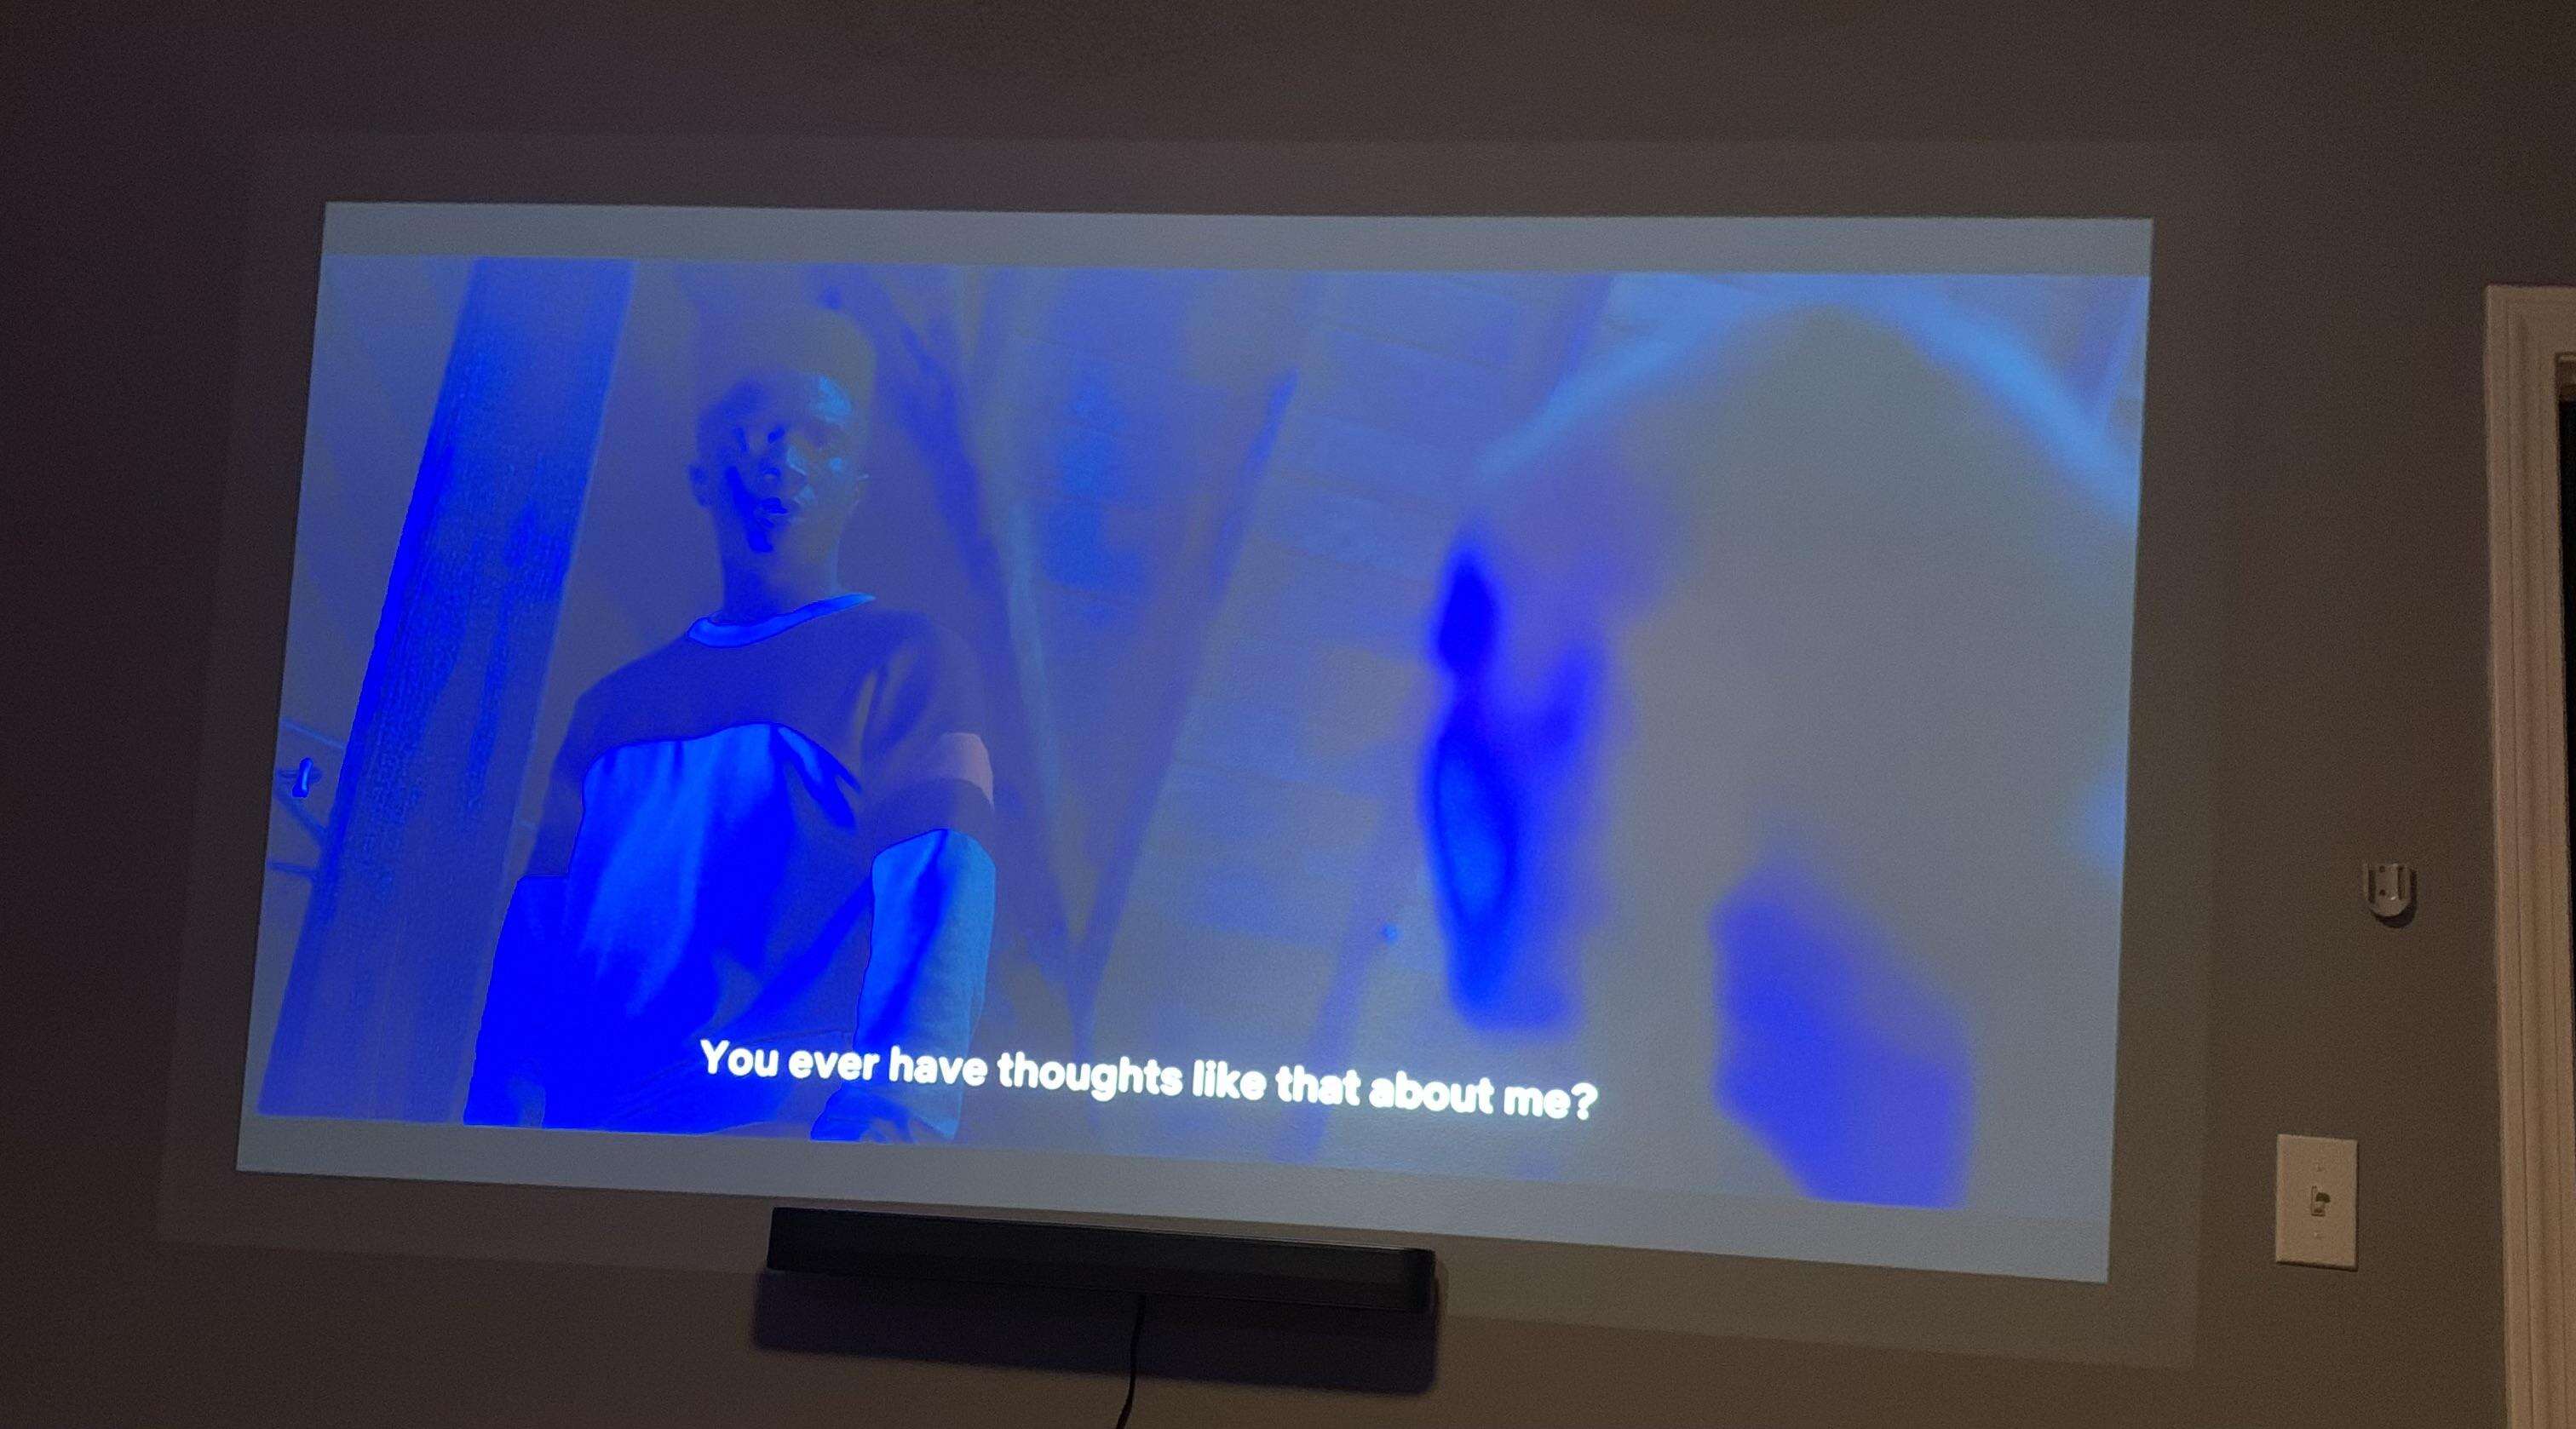 Why Is My Projector Showing Blue